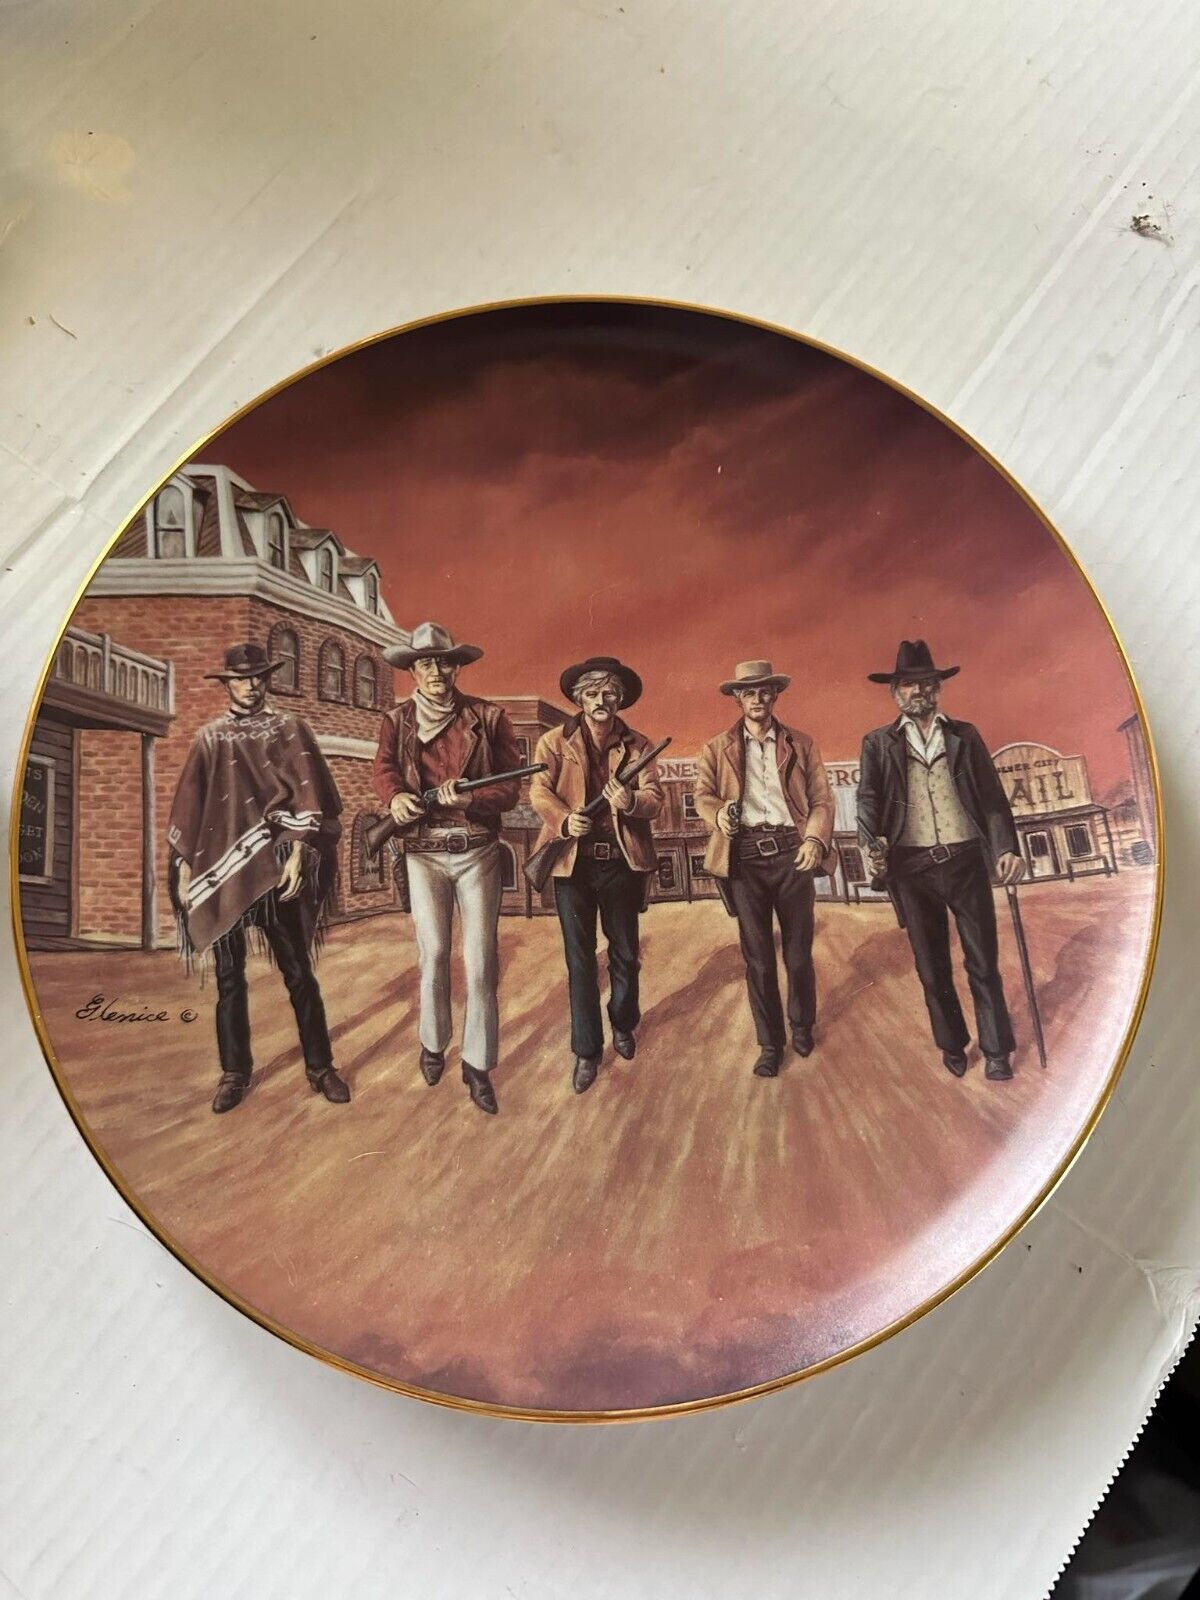 The Gunfight Plate 1987 by Glenice Vintage Clint Eastwood Robert Redford Cowboy